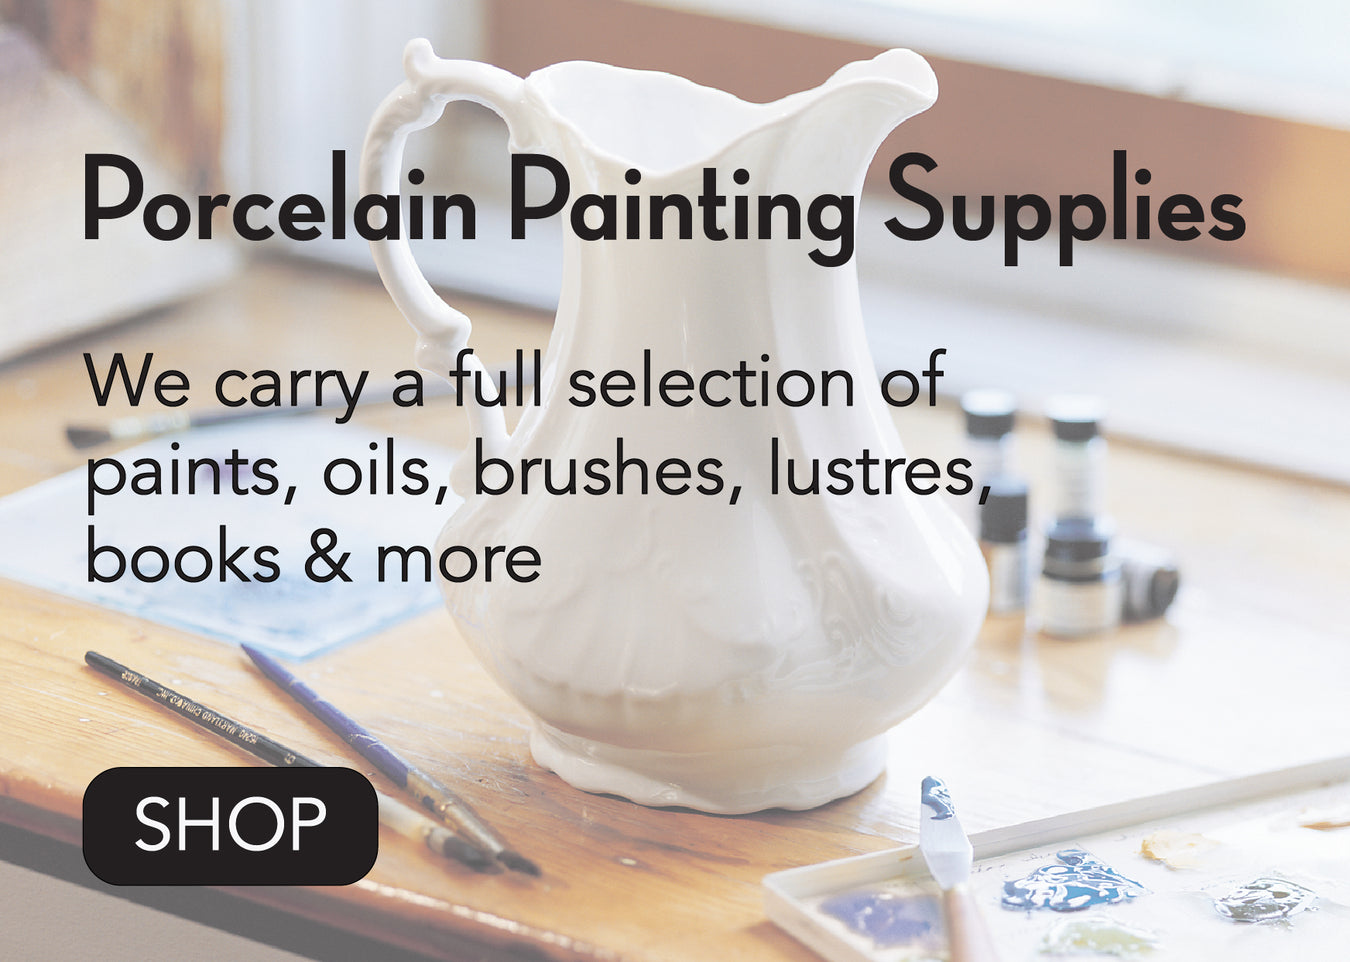 Porcelain Painting Supplies  We are the premier supplier of fine white porcelain as well as china painting supplies and books.